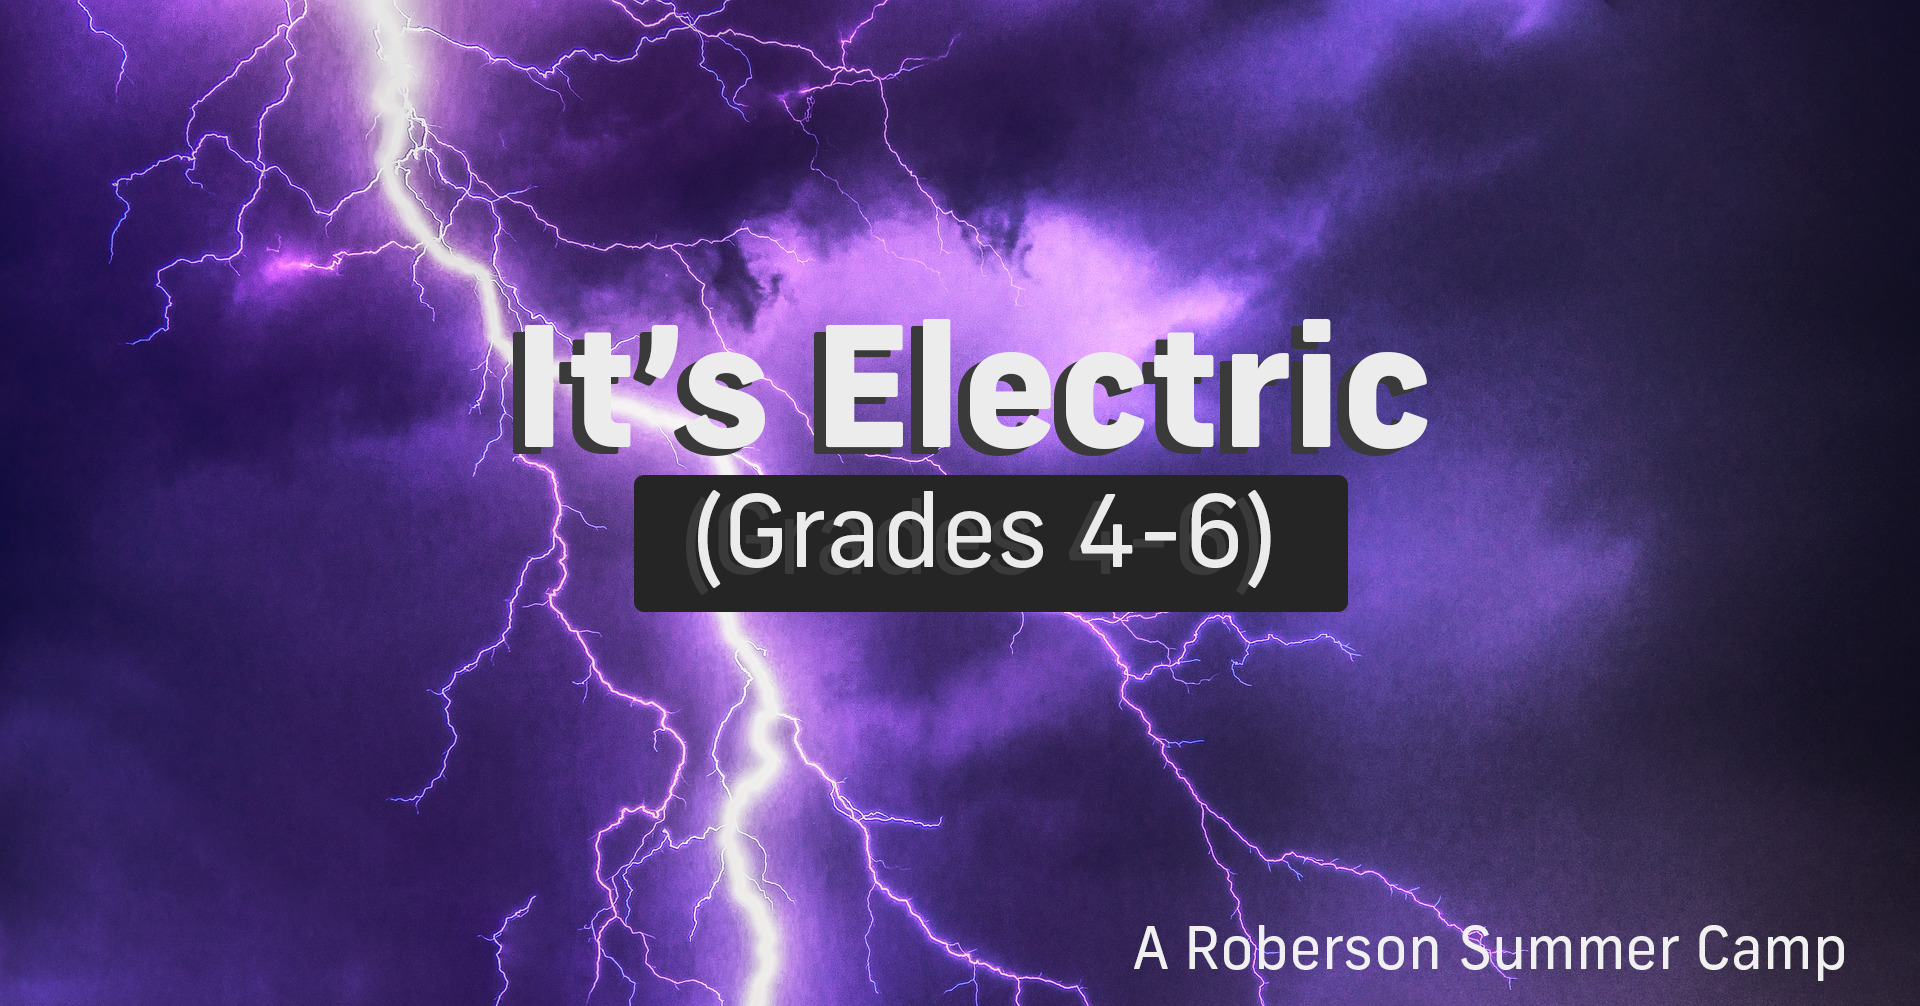 Roberson Summer Camp - It's Electric